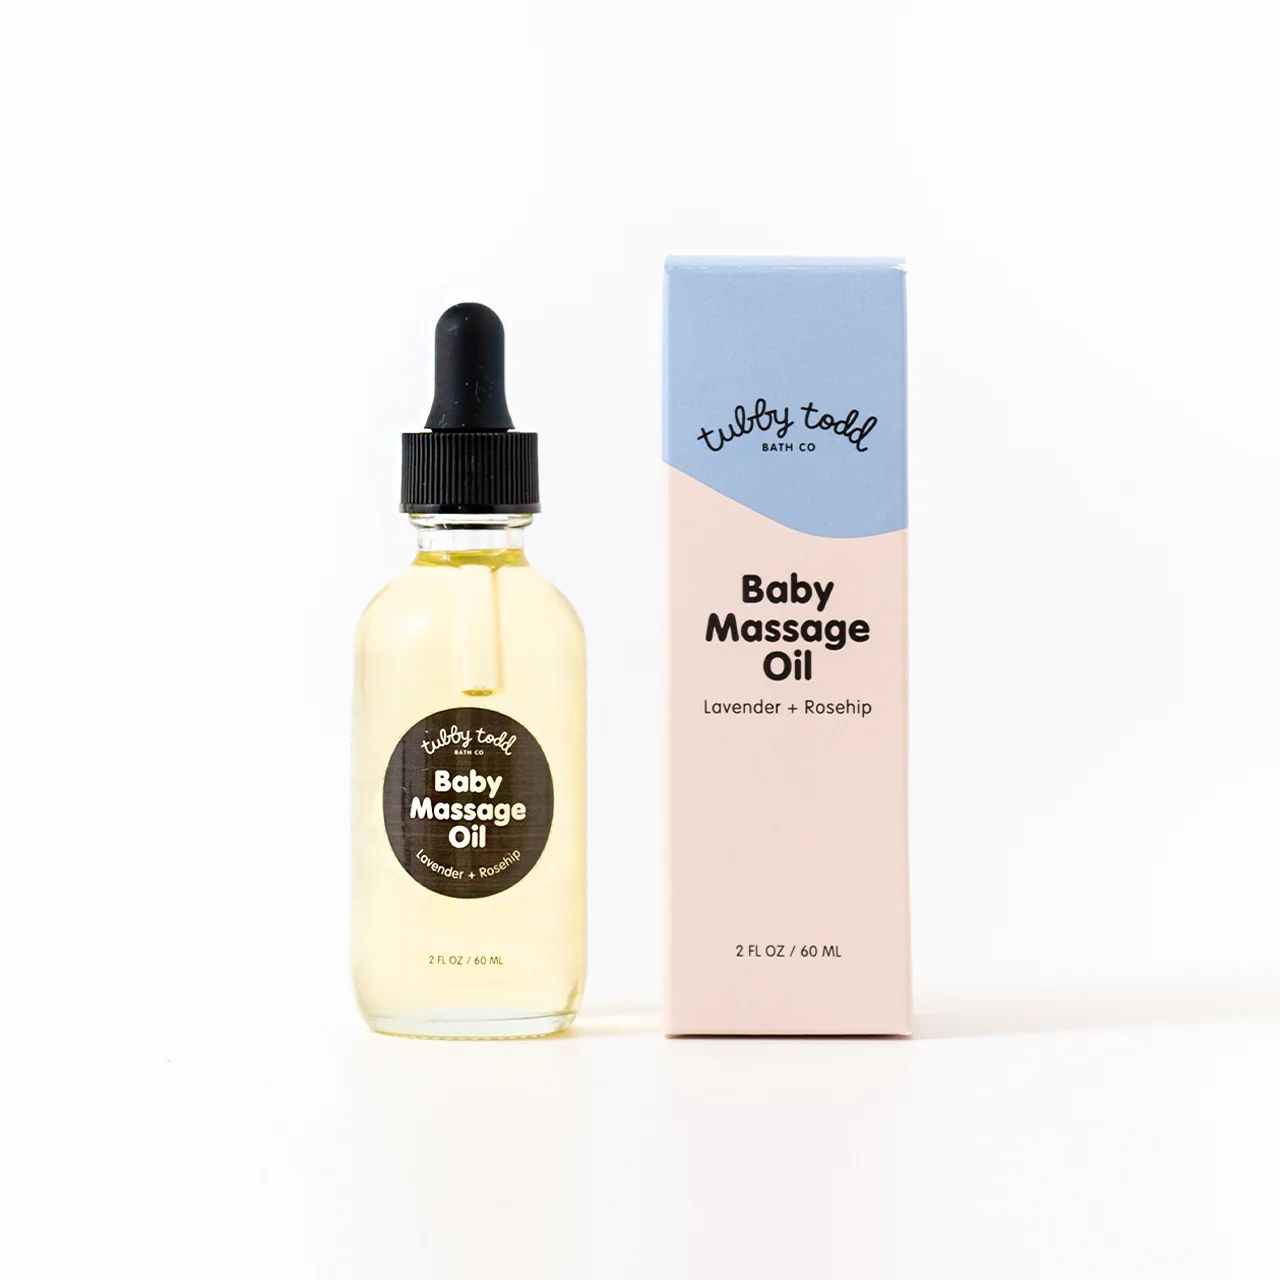 Baby Massage Oil | Tubby Todd Bath Co